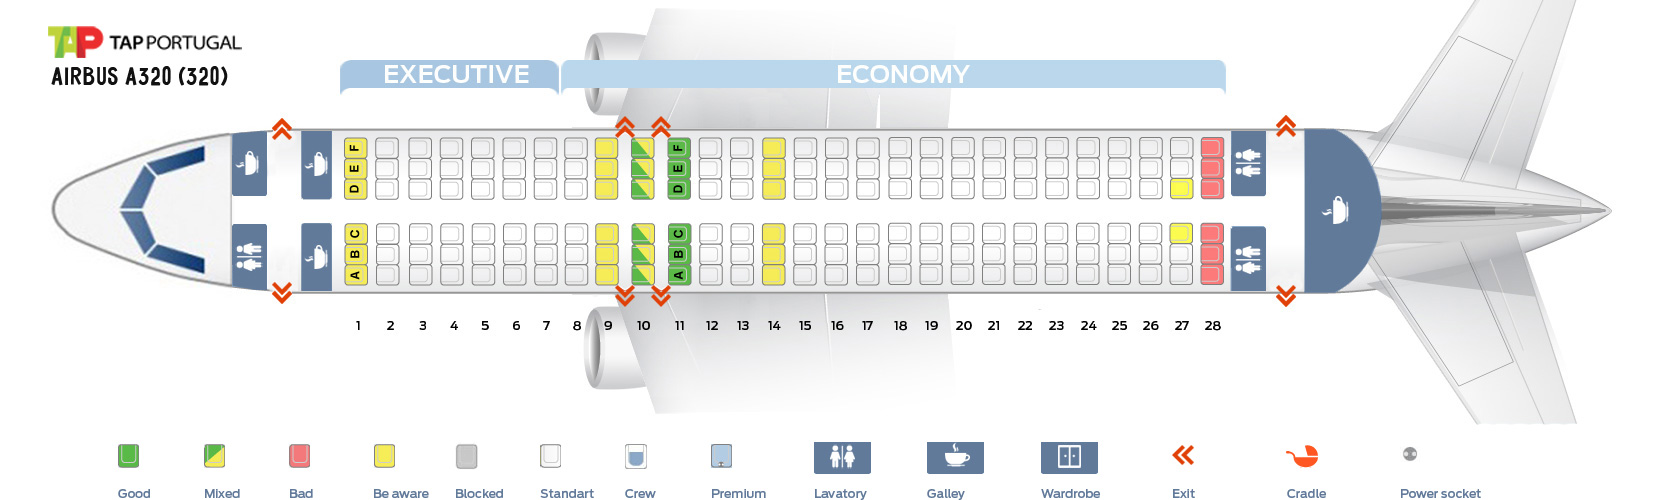 Tap Portugal Seating Chart